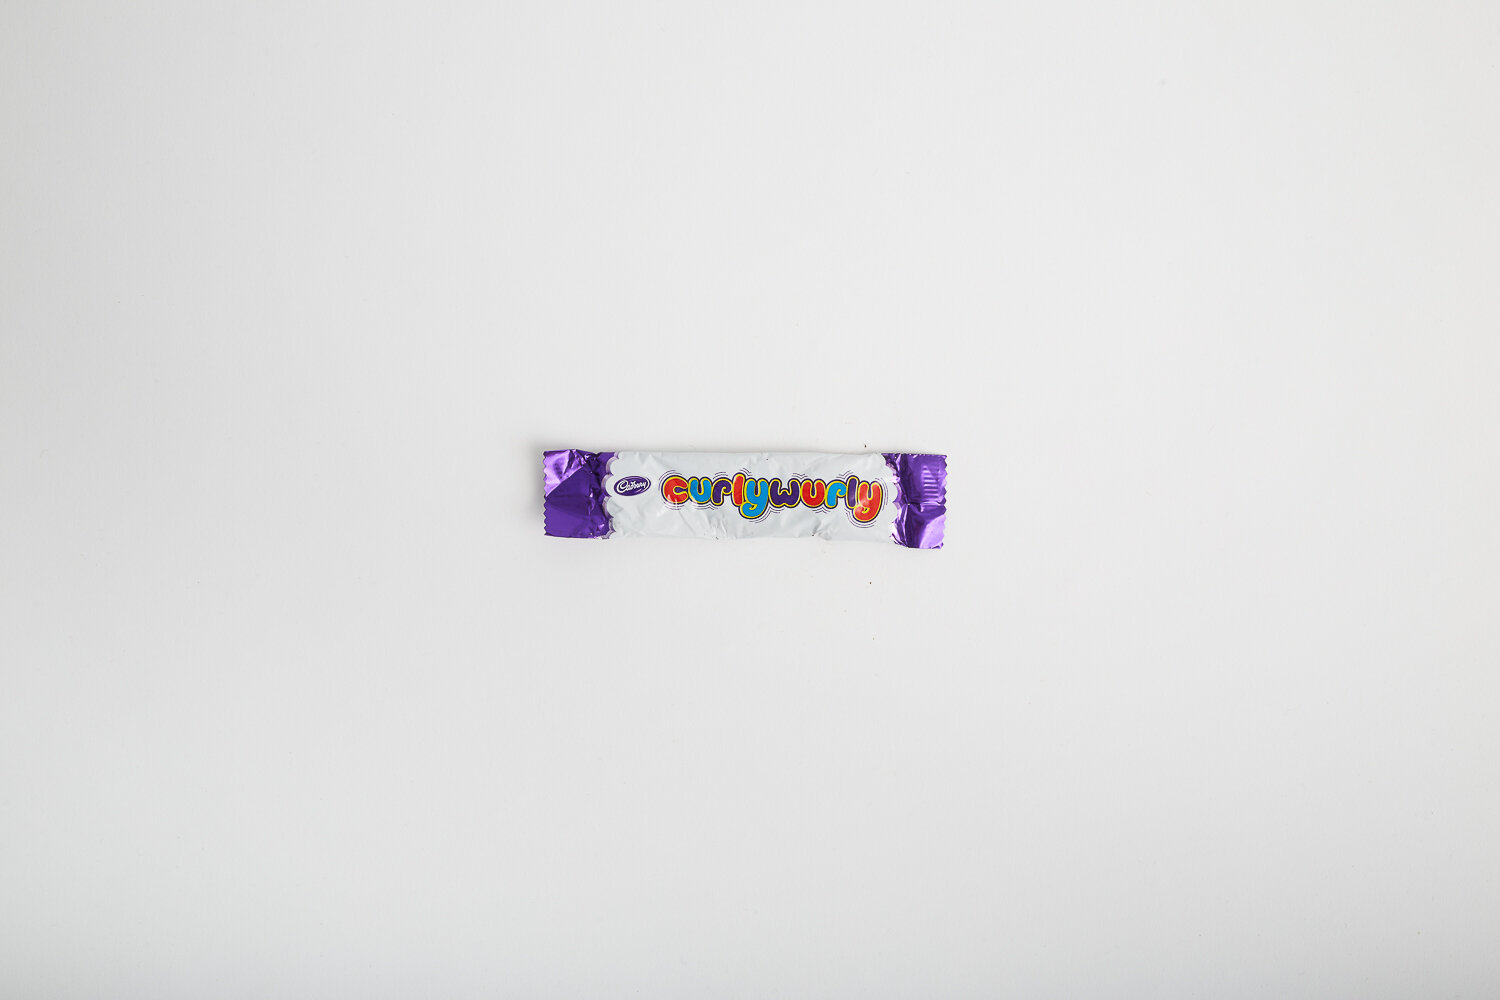 Curlywurly for some reason.